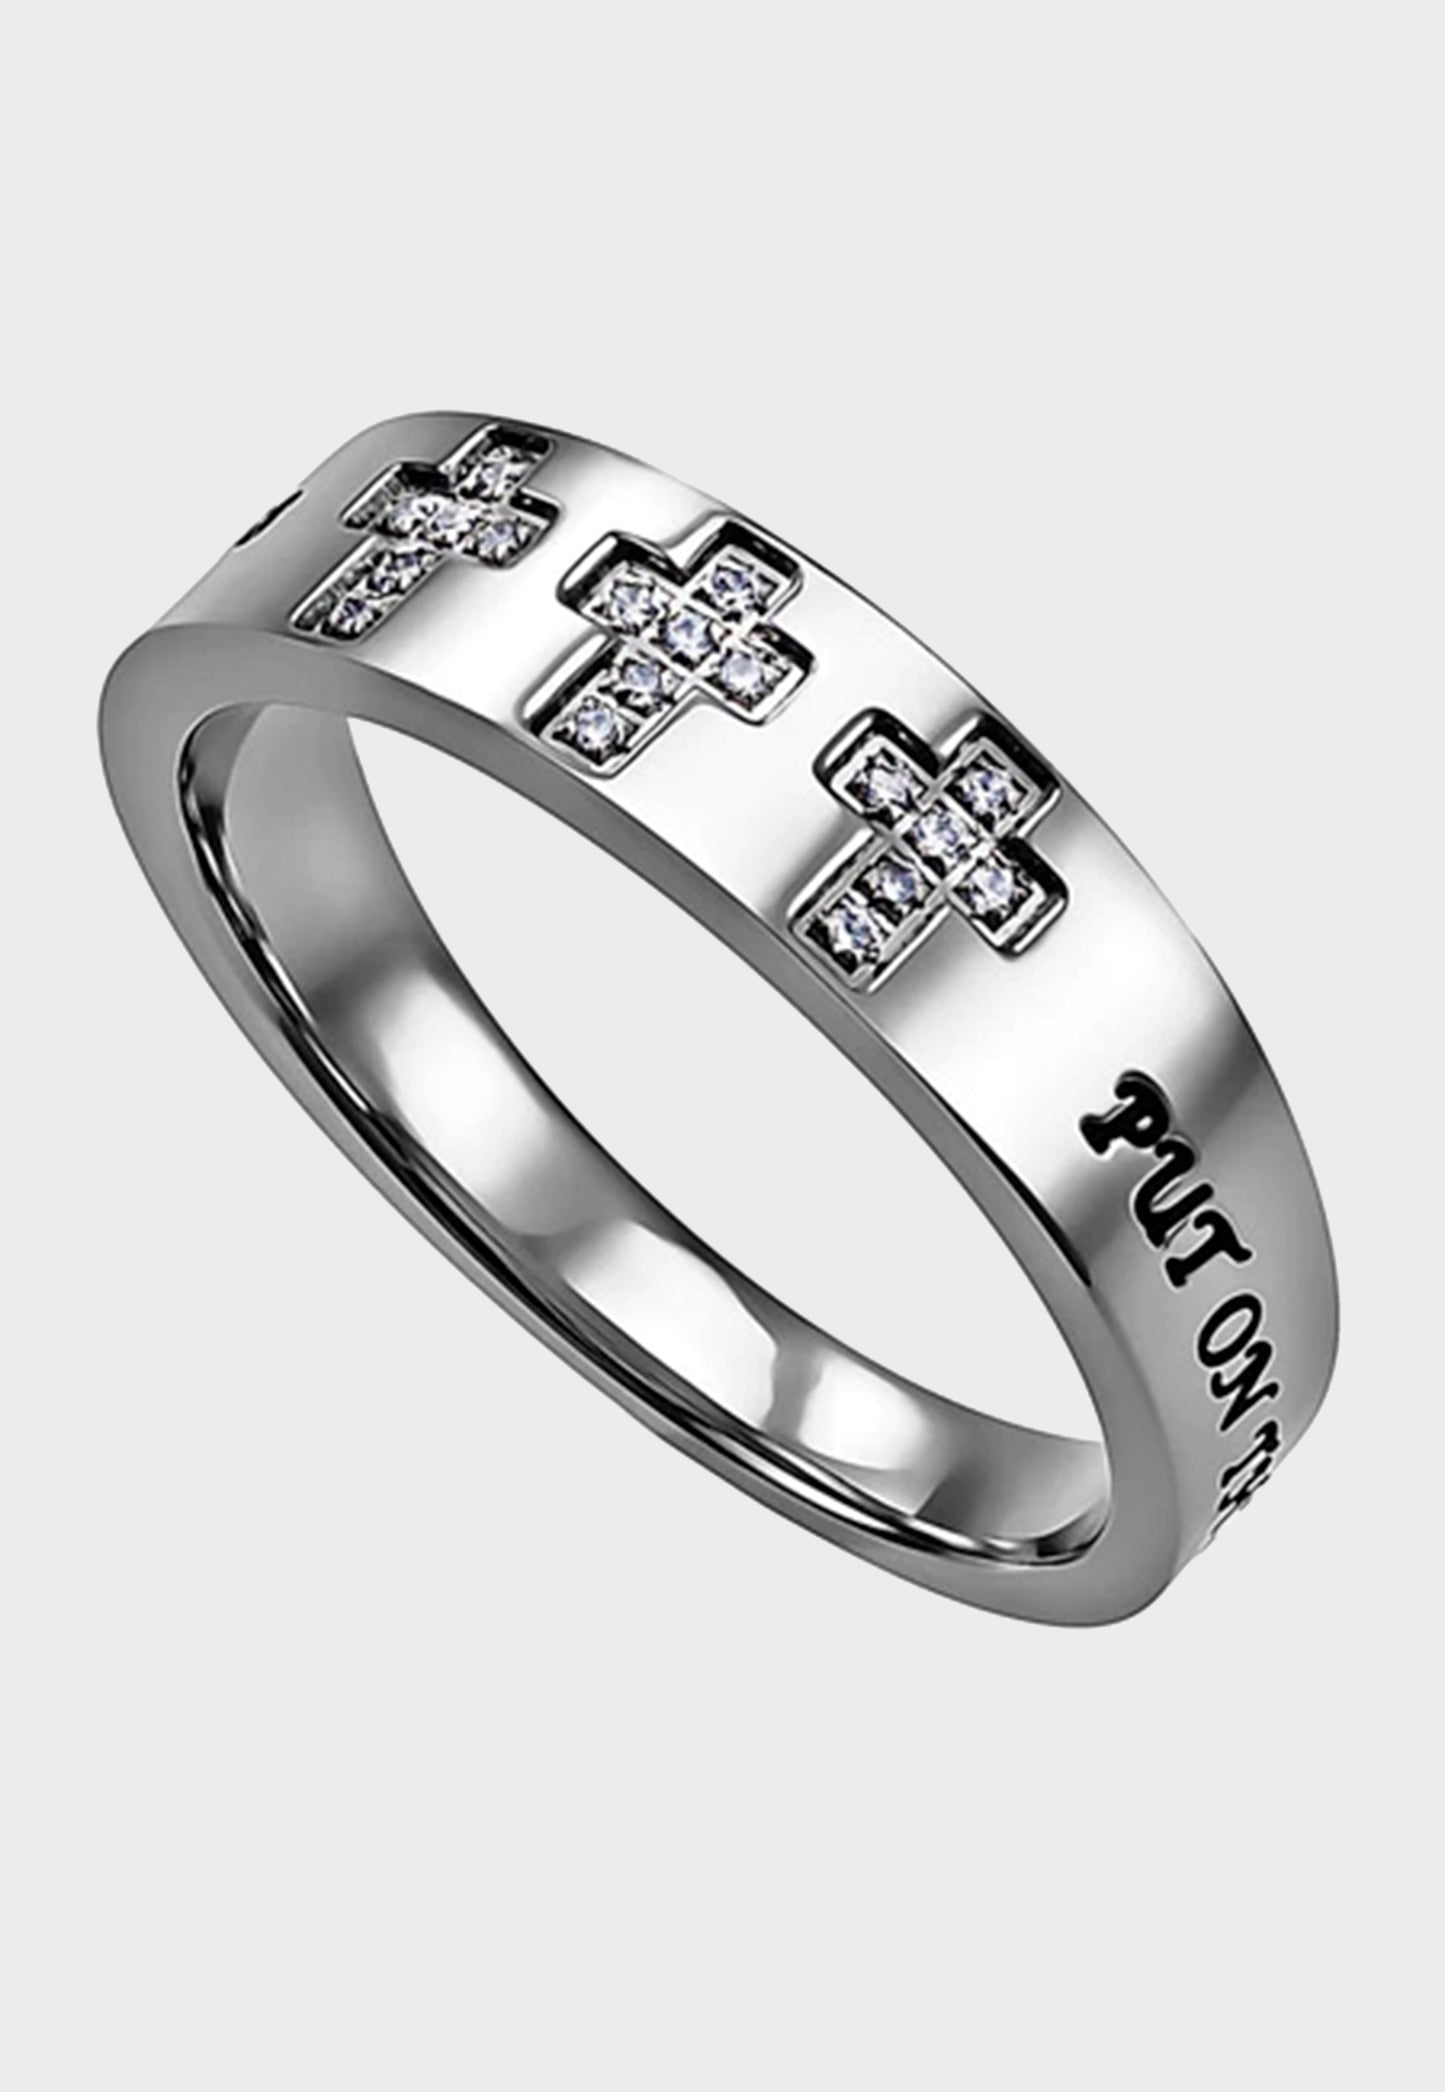 Ladies Christian ring with crosses